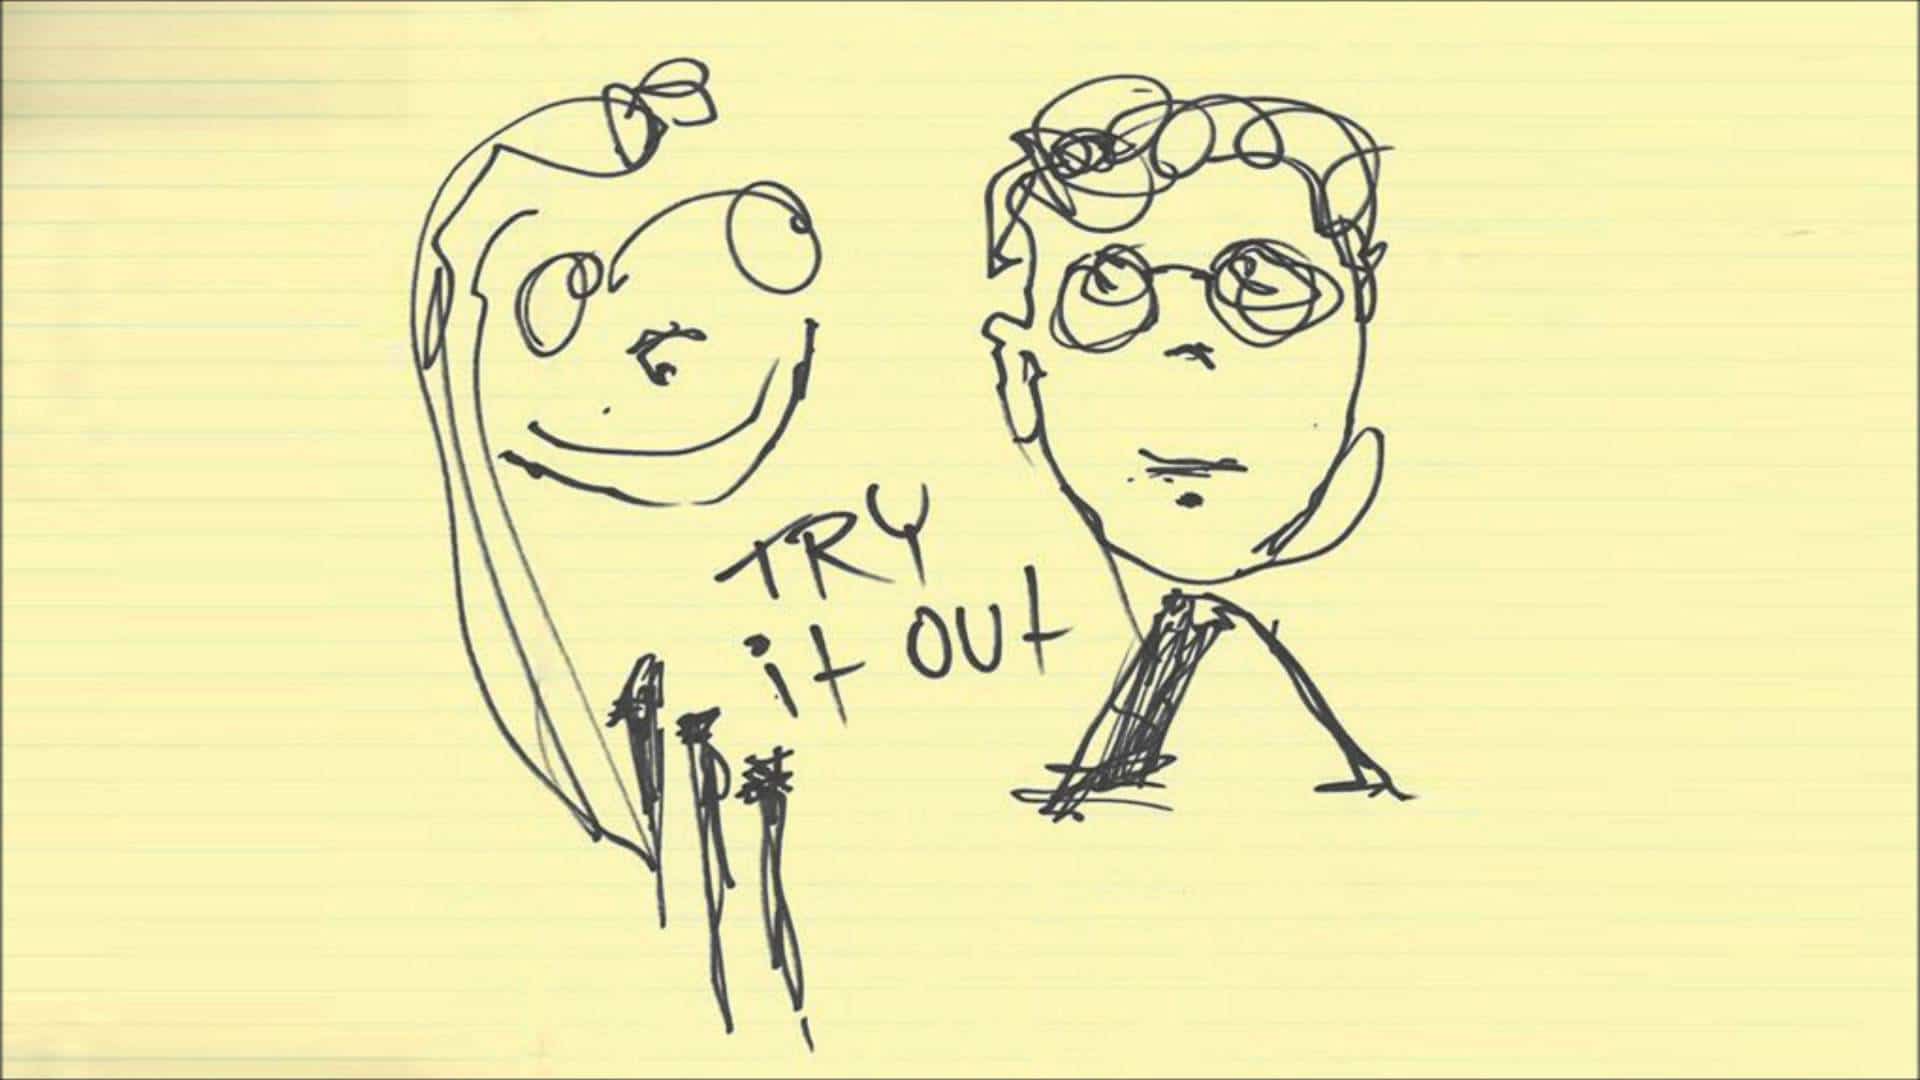 A Skrillex-inspired drawing featuring a couple with the words "Try It Out" in a bold font.